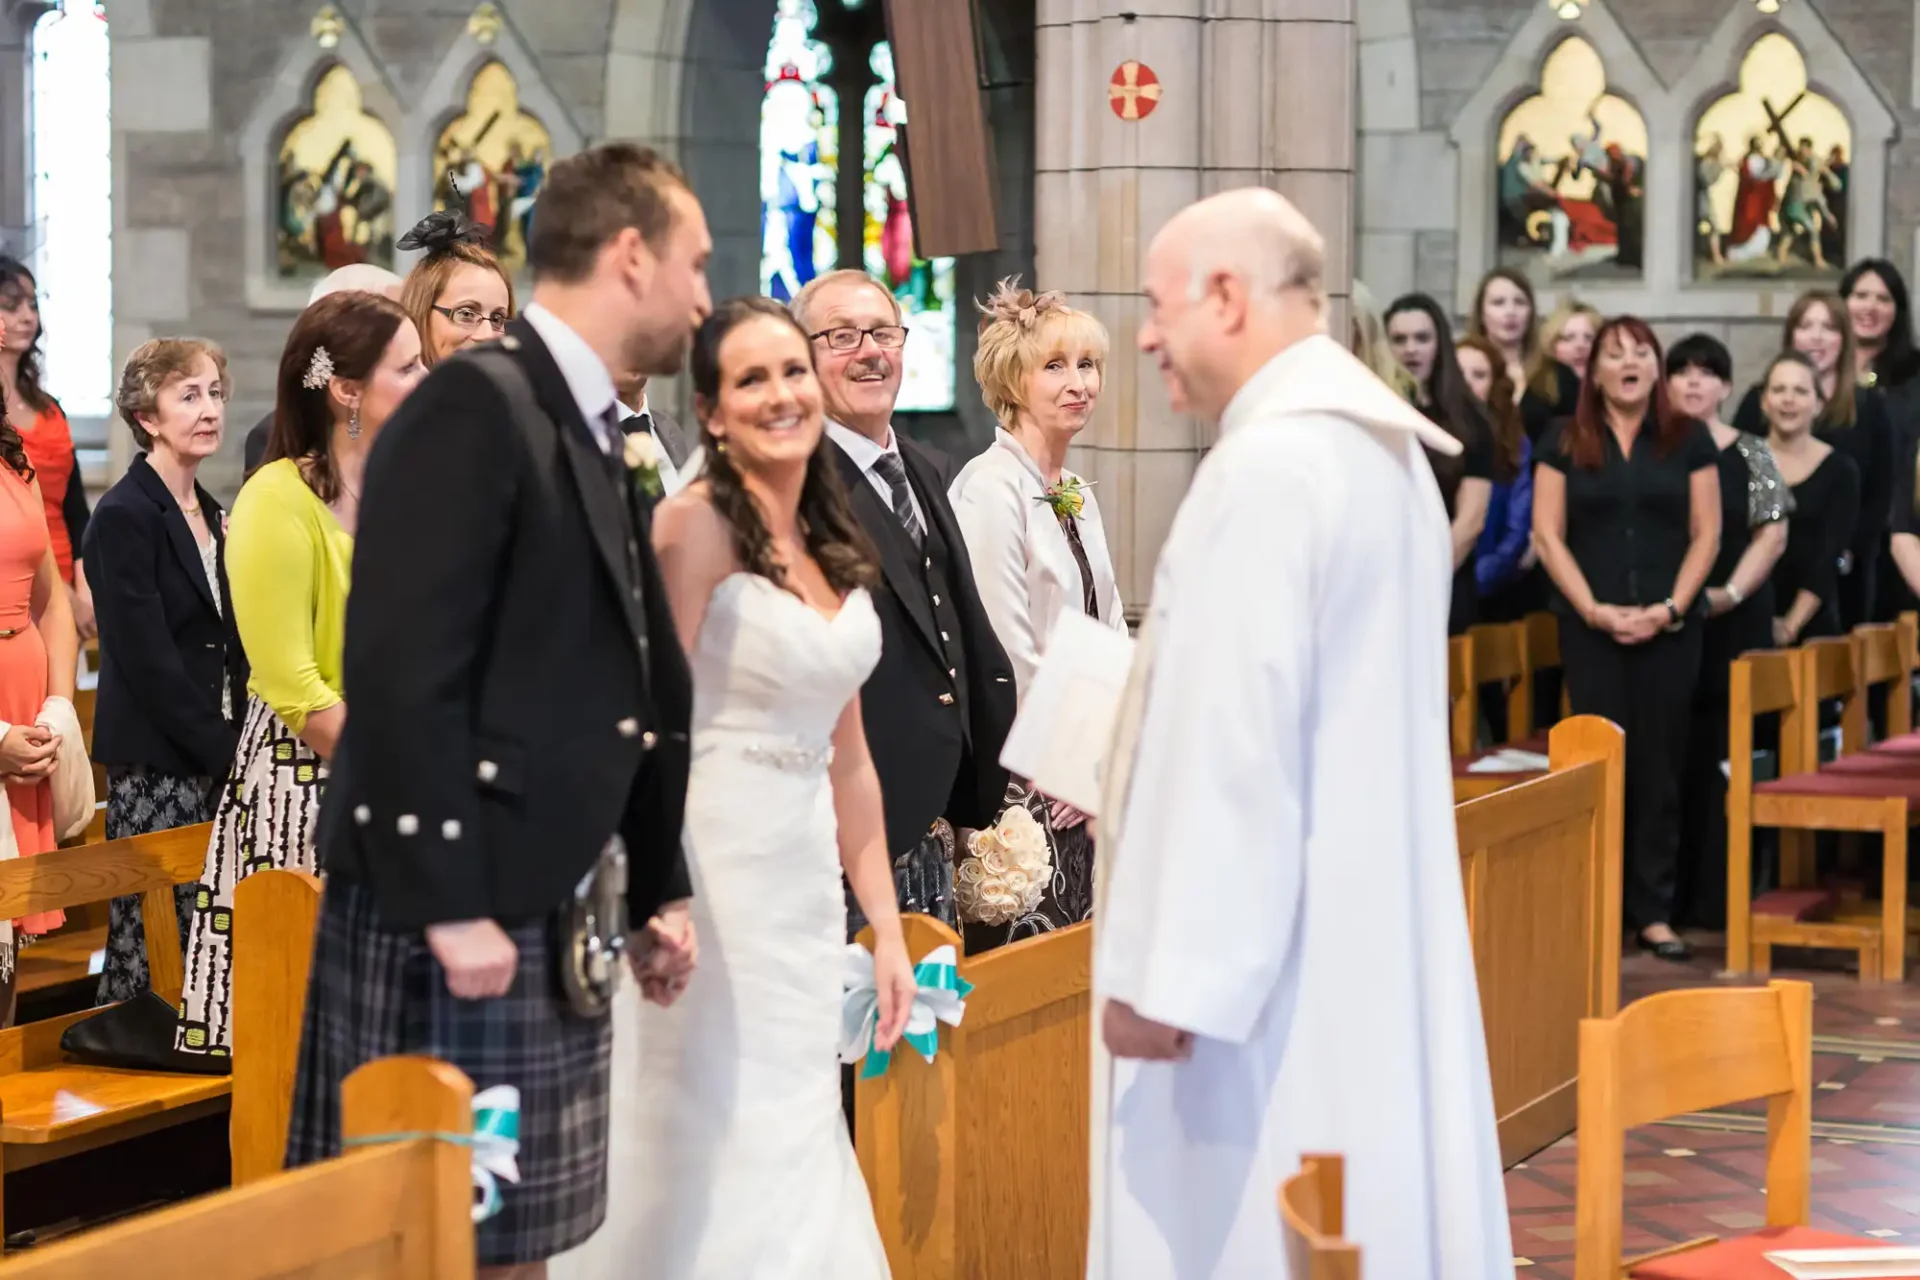 A bride and groom smiling at each other in a church during their wedding ceremony, surrounded by guests and a priest.